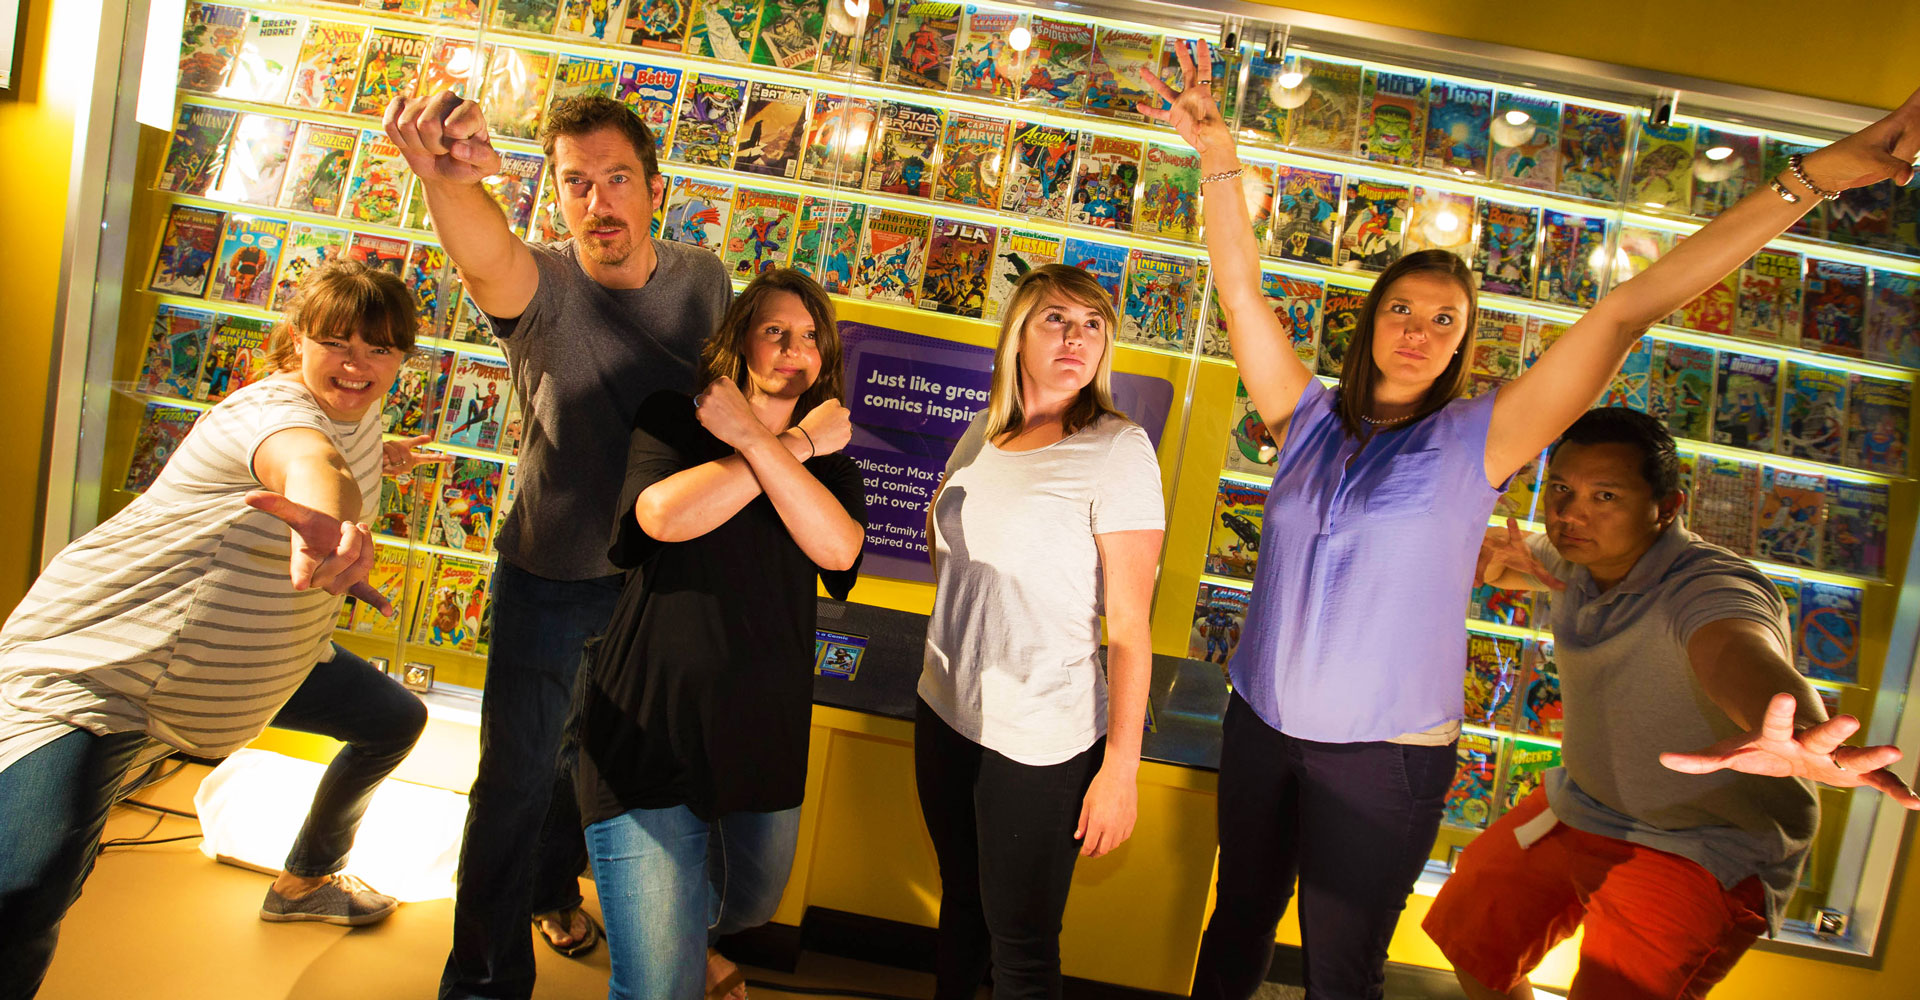 Adults in superhero poses with a wall of comic books behind them.